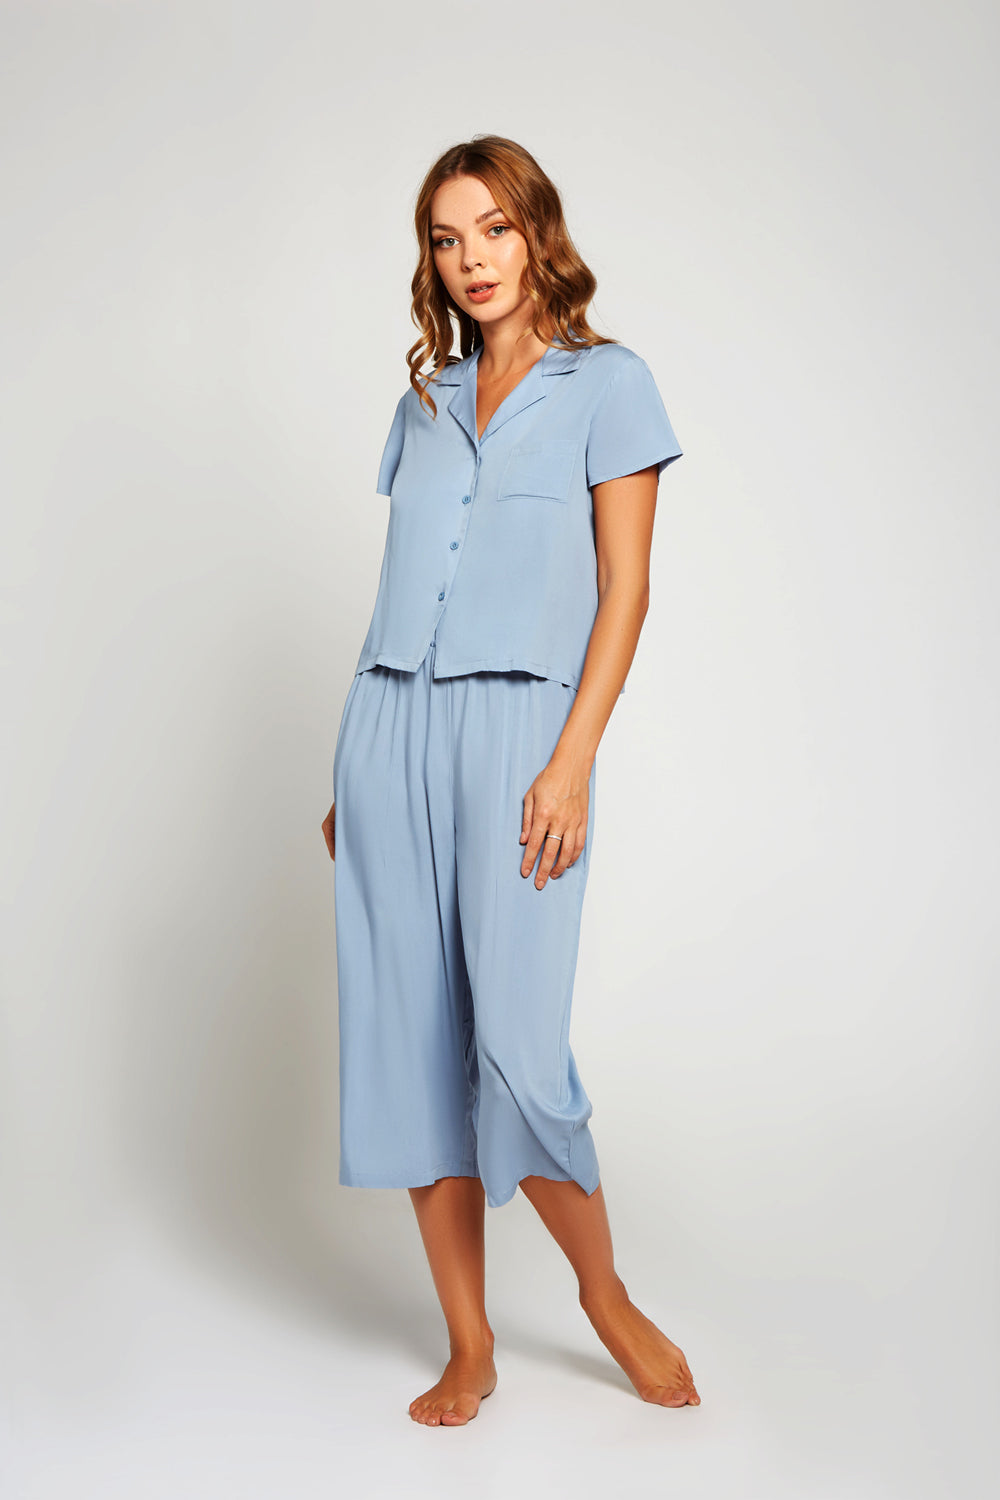 Renee Pajama Top Icollection iCollection 78075